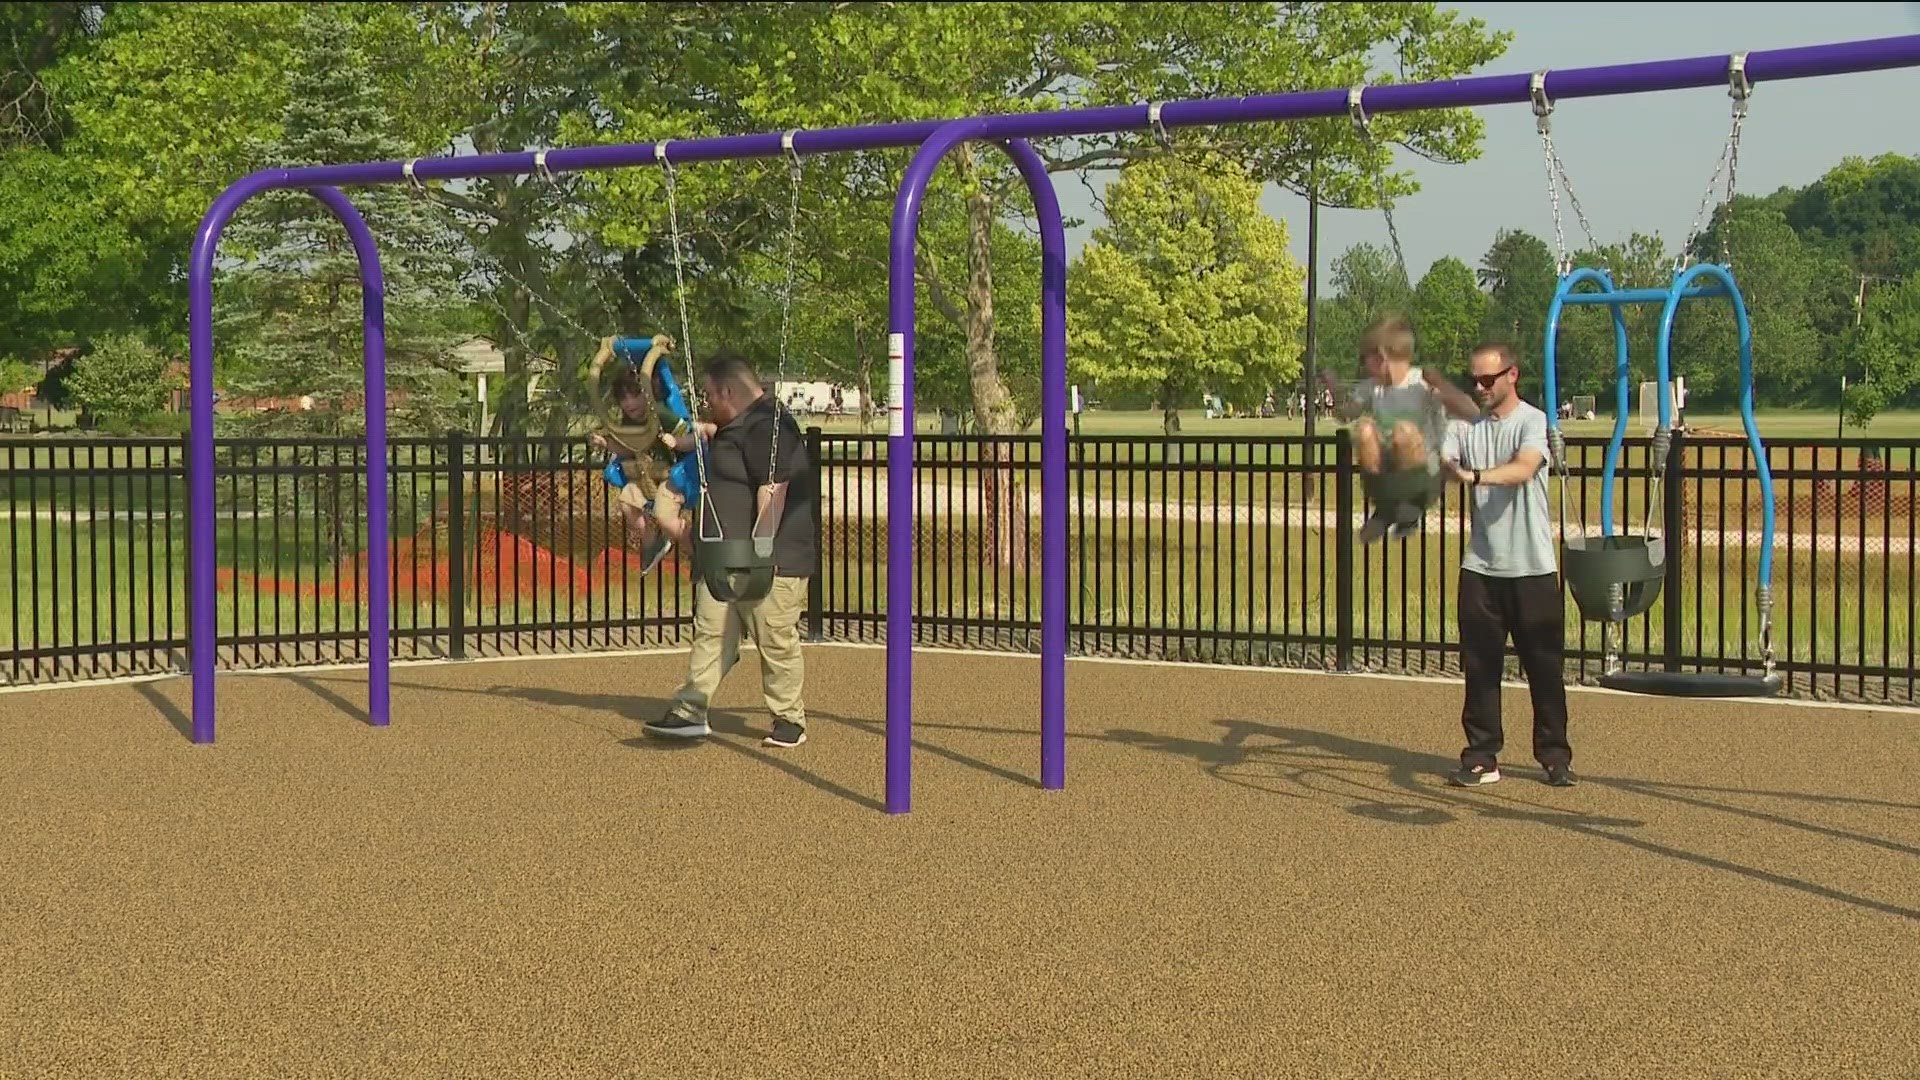 It is the city of Perrysburg's second inclusive playground and the third new playground to open this month.